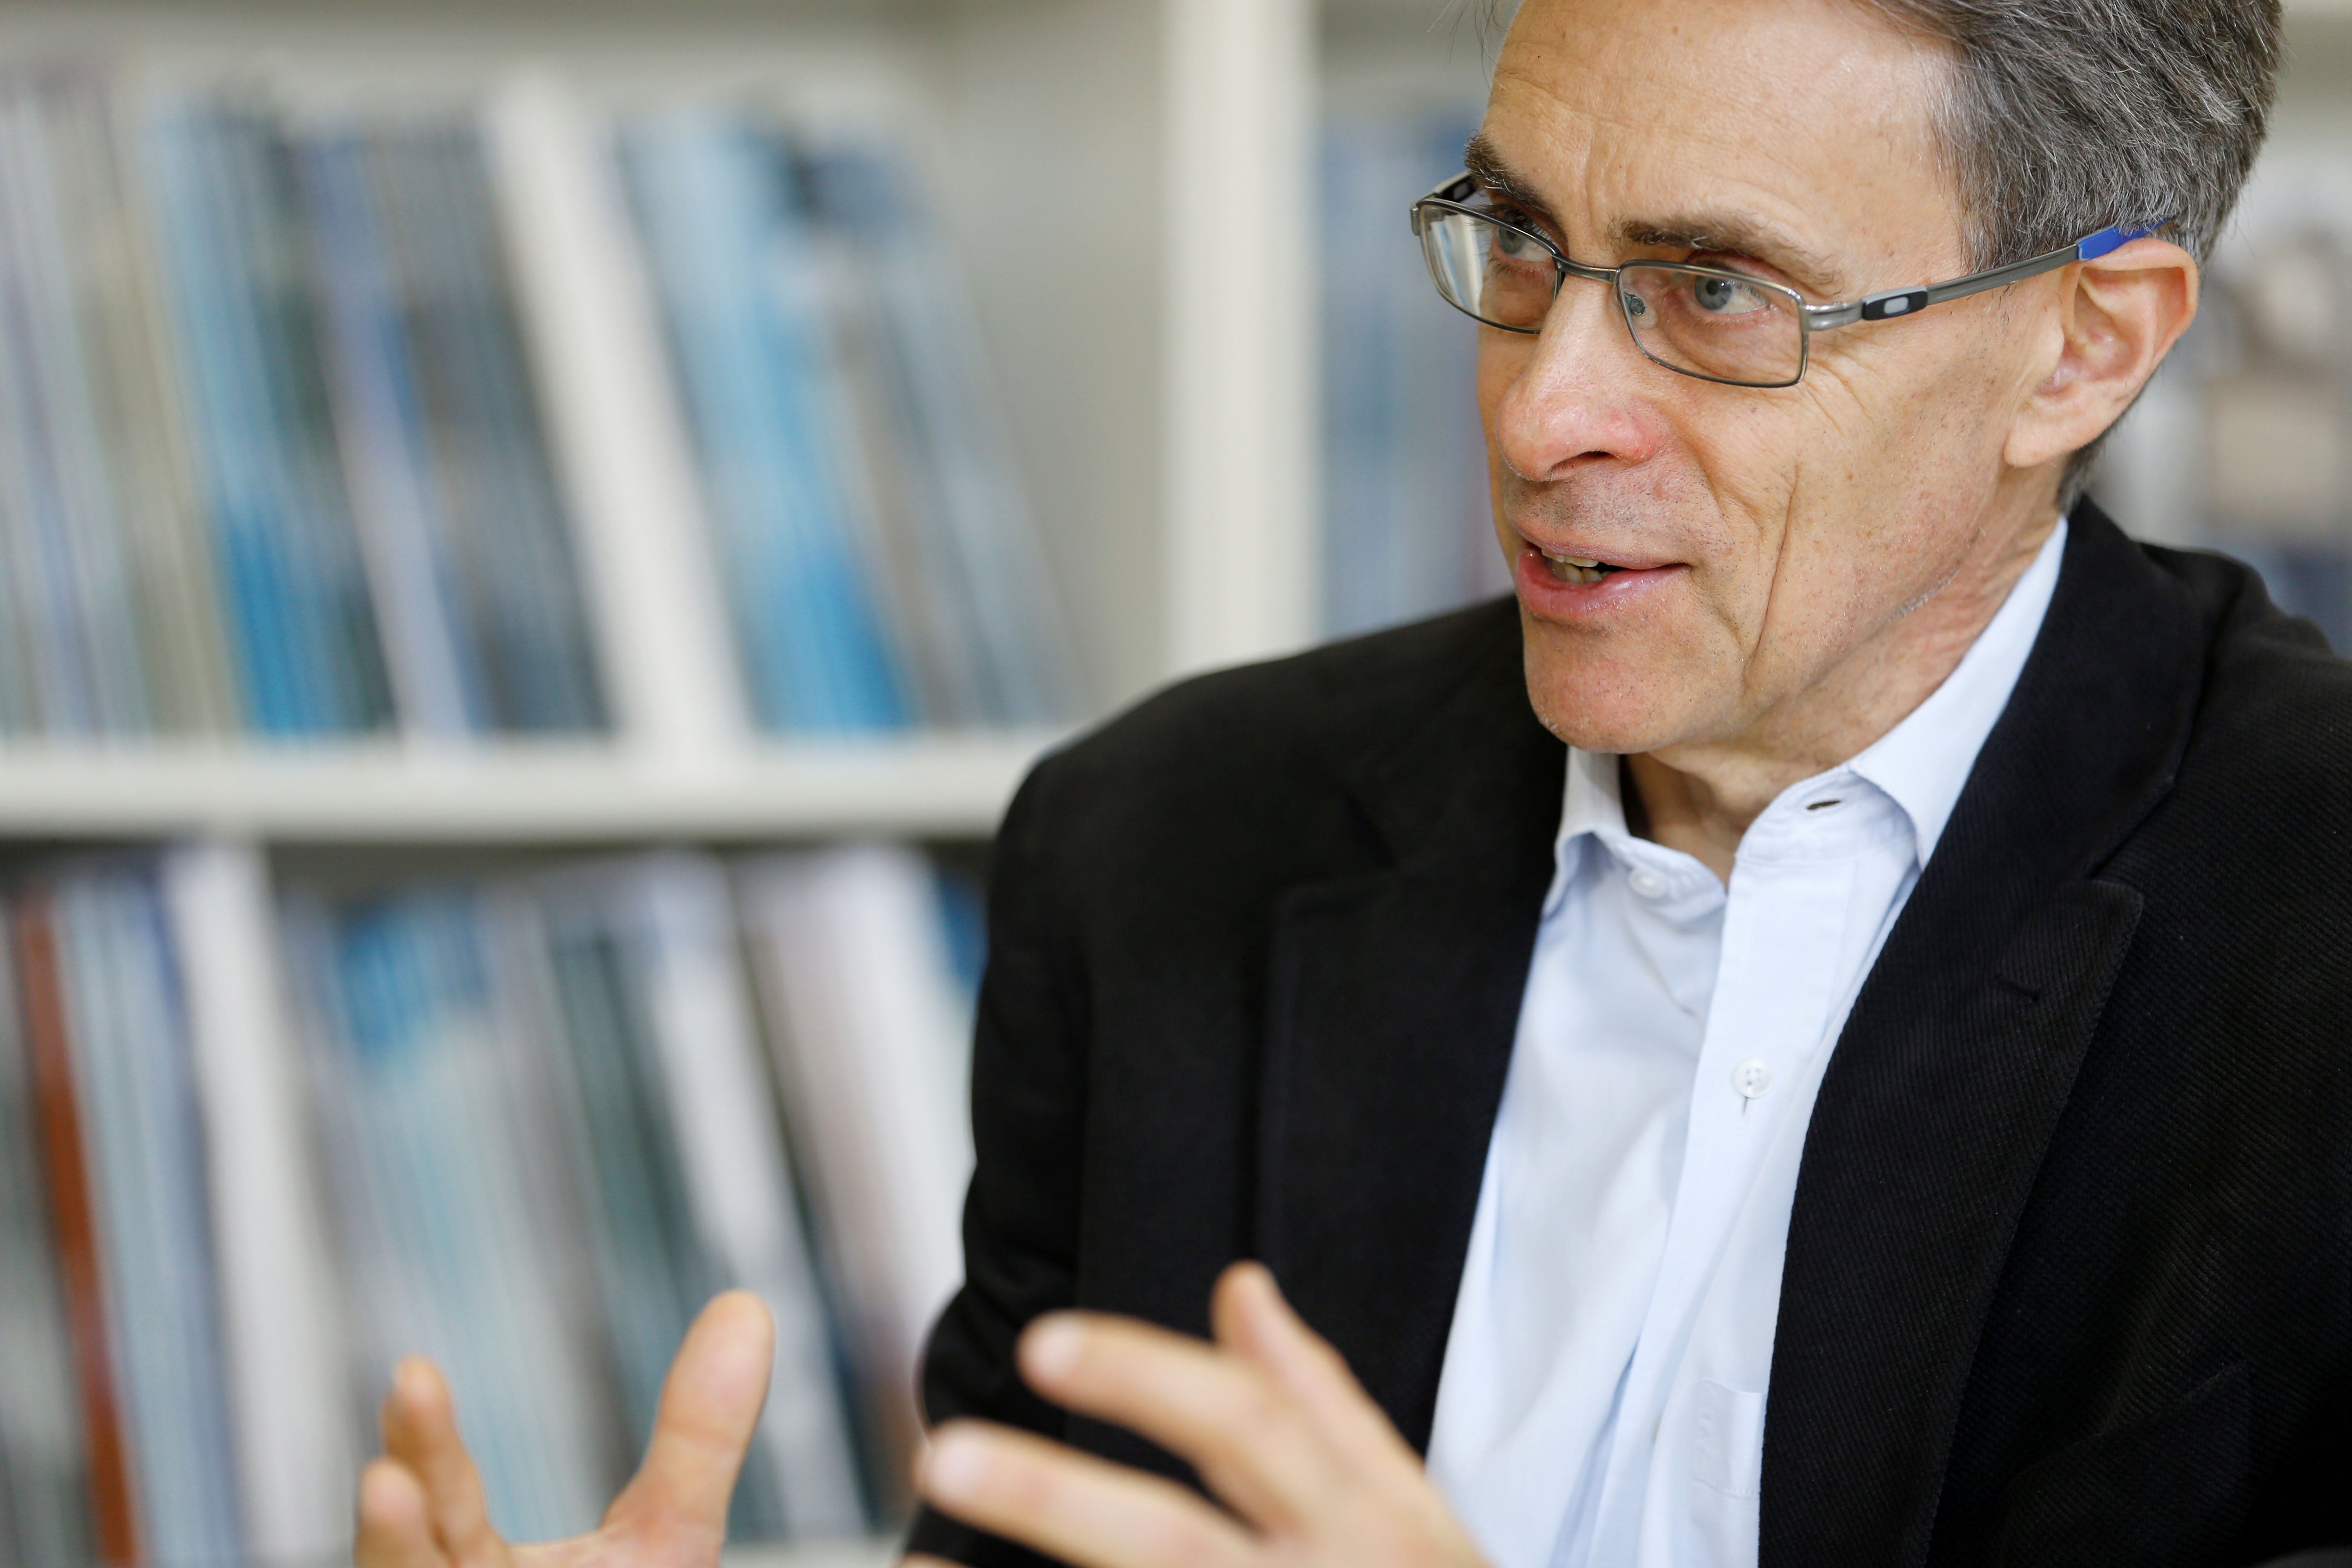 Human Rights Watch Executive Director Kenneth Roth speaks during an interview